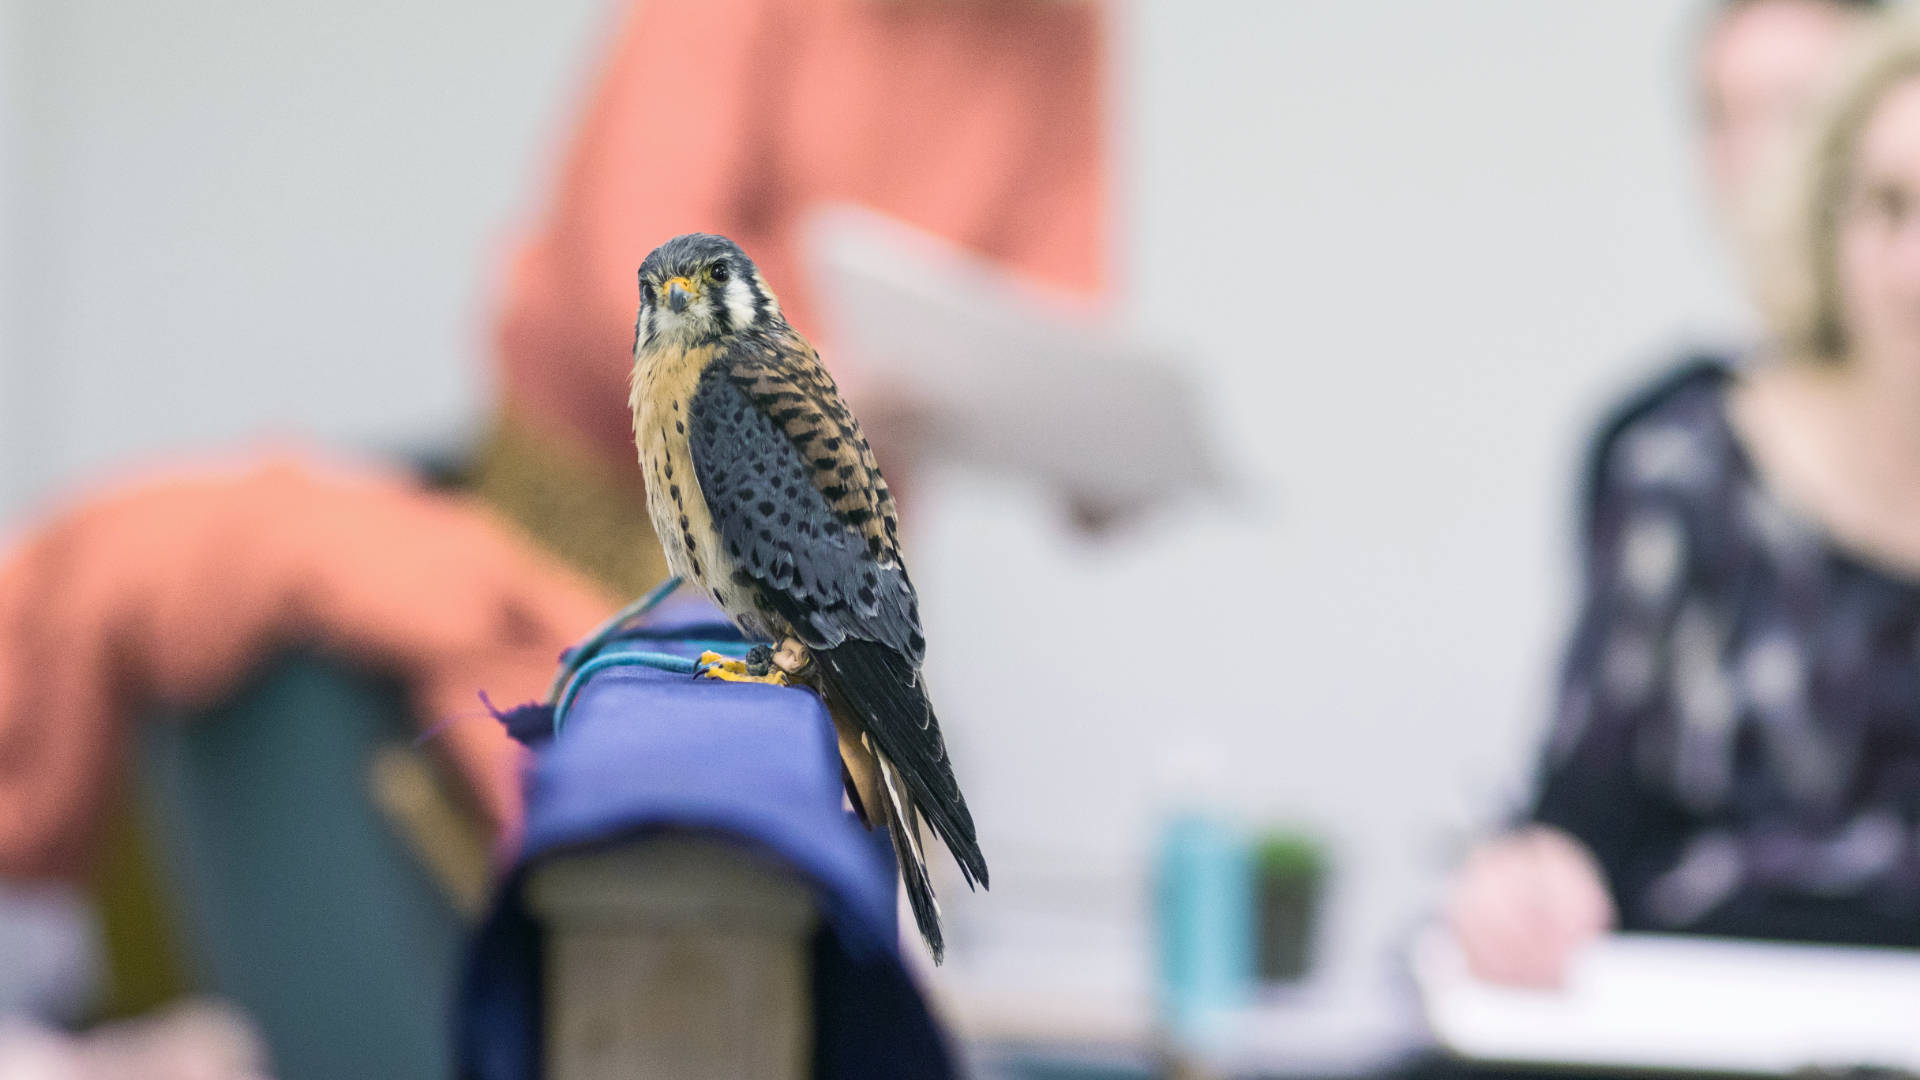 A living bird used as a model for a wildlife drawing class.